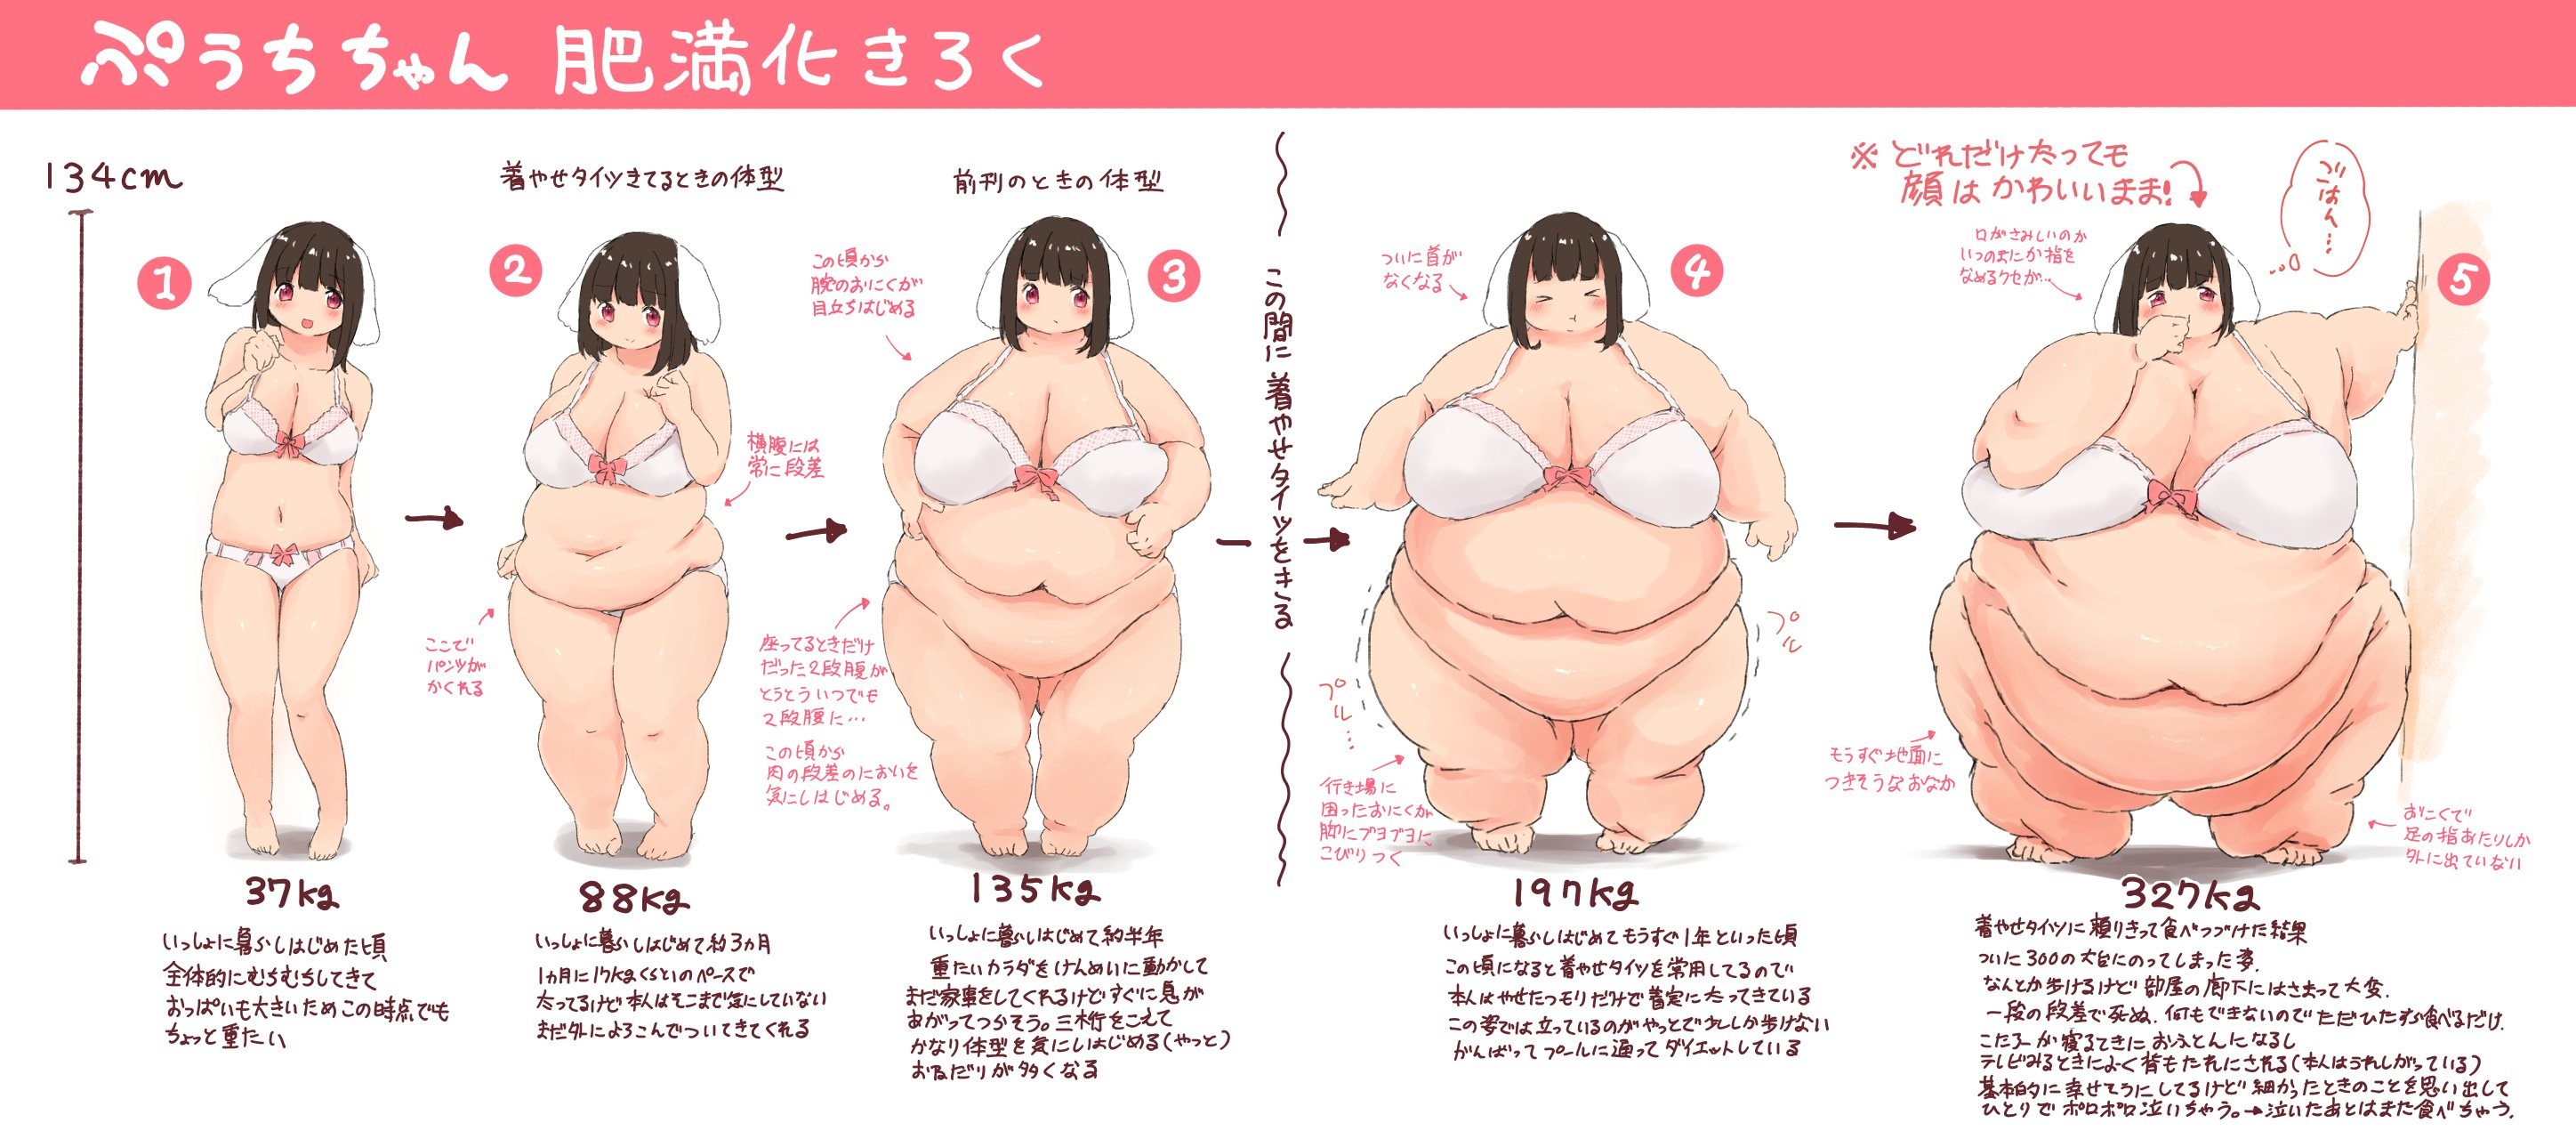 Fat Anime Porn - Sex with Fat Women of Different Ages (74 photos) - porn ddeva